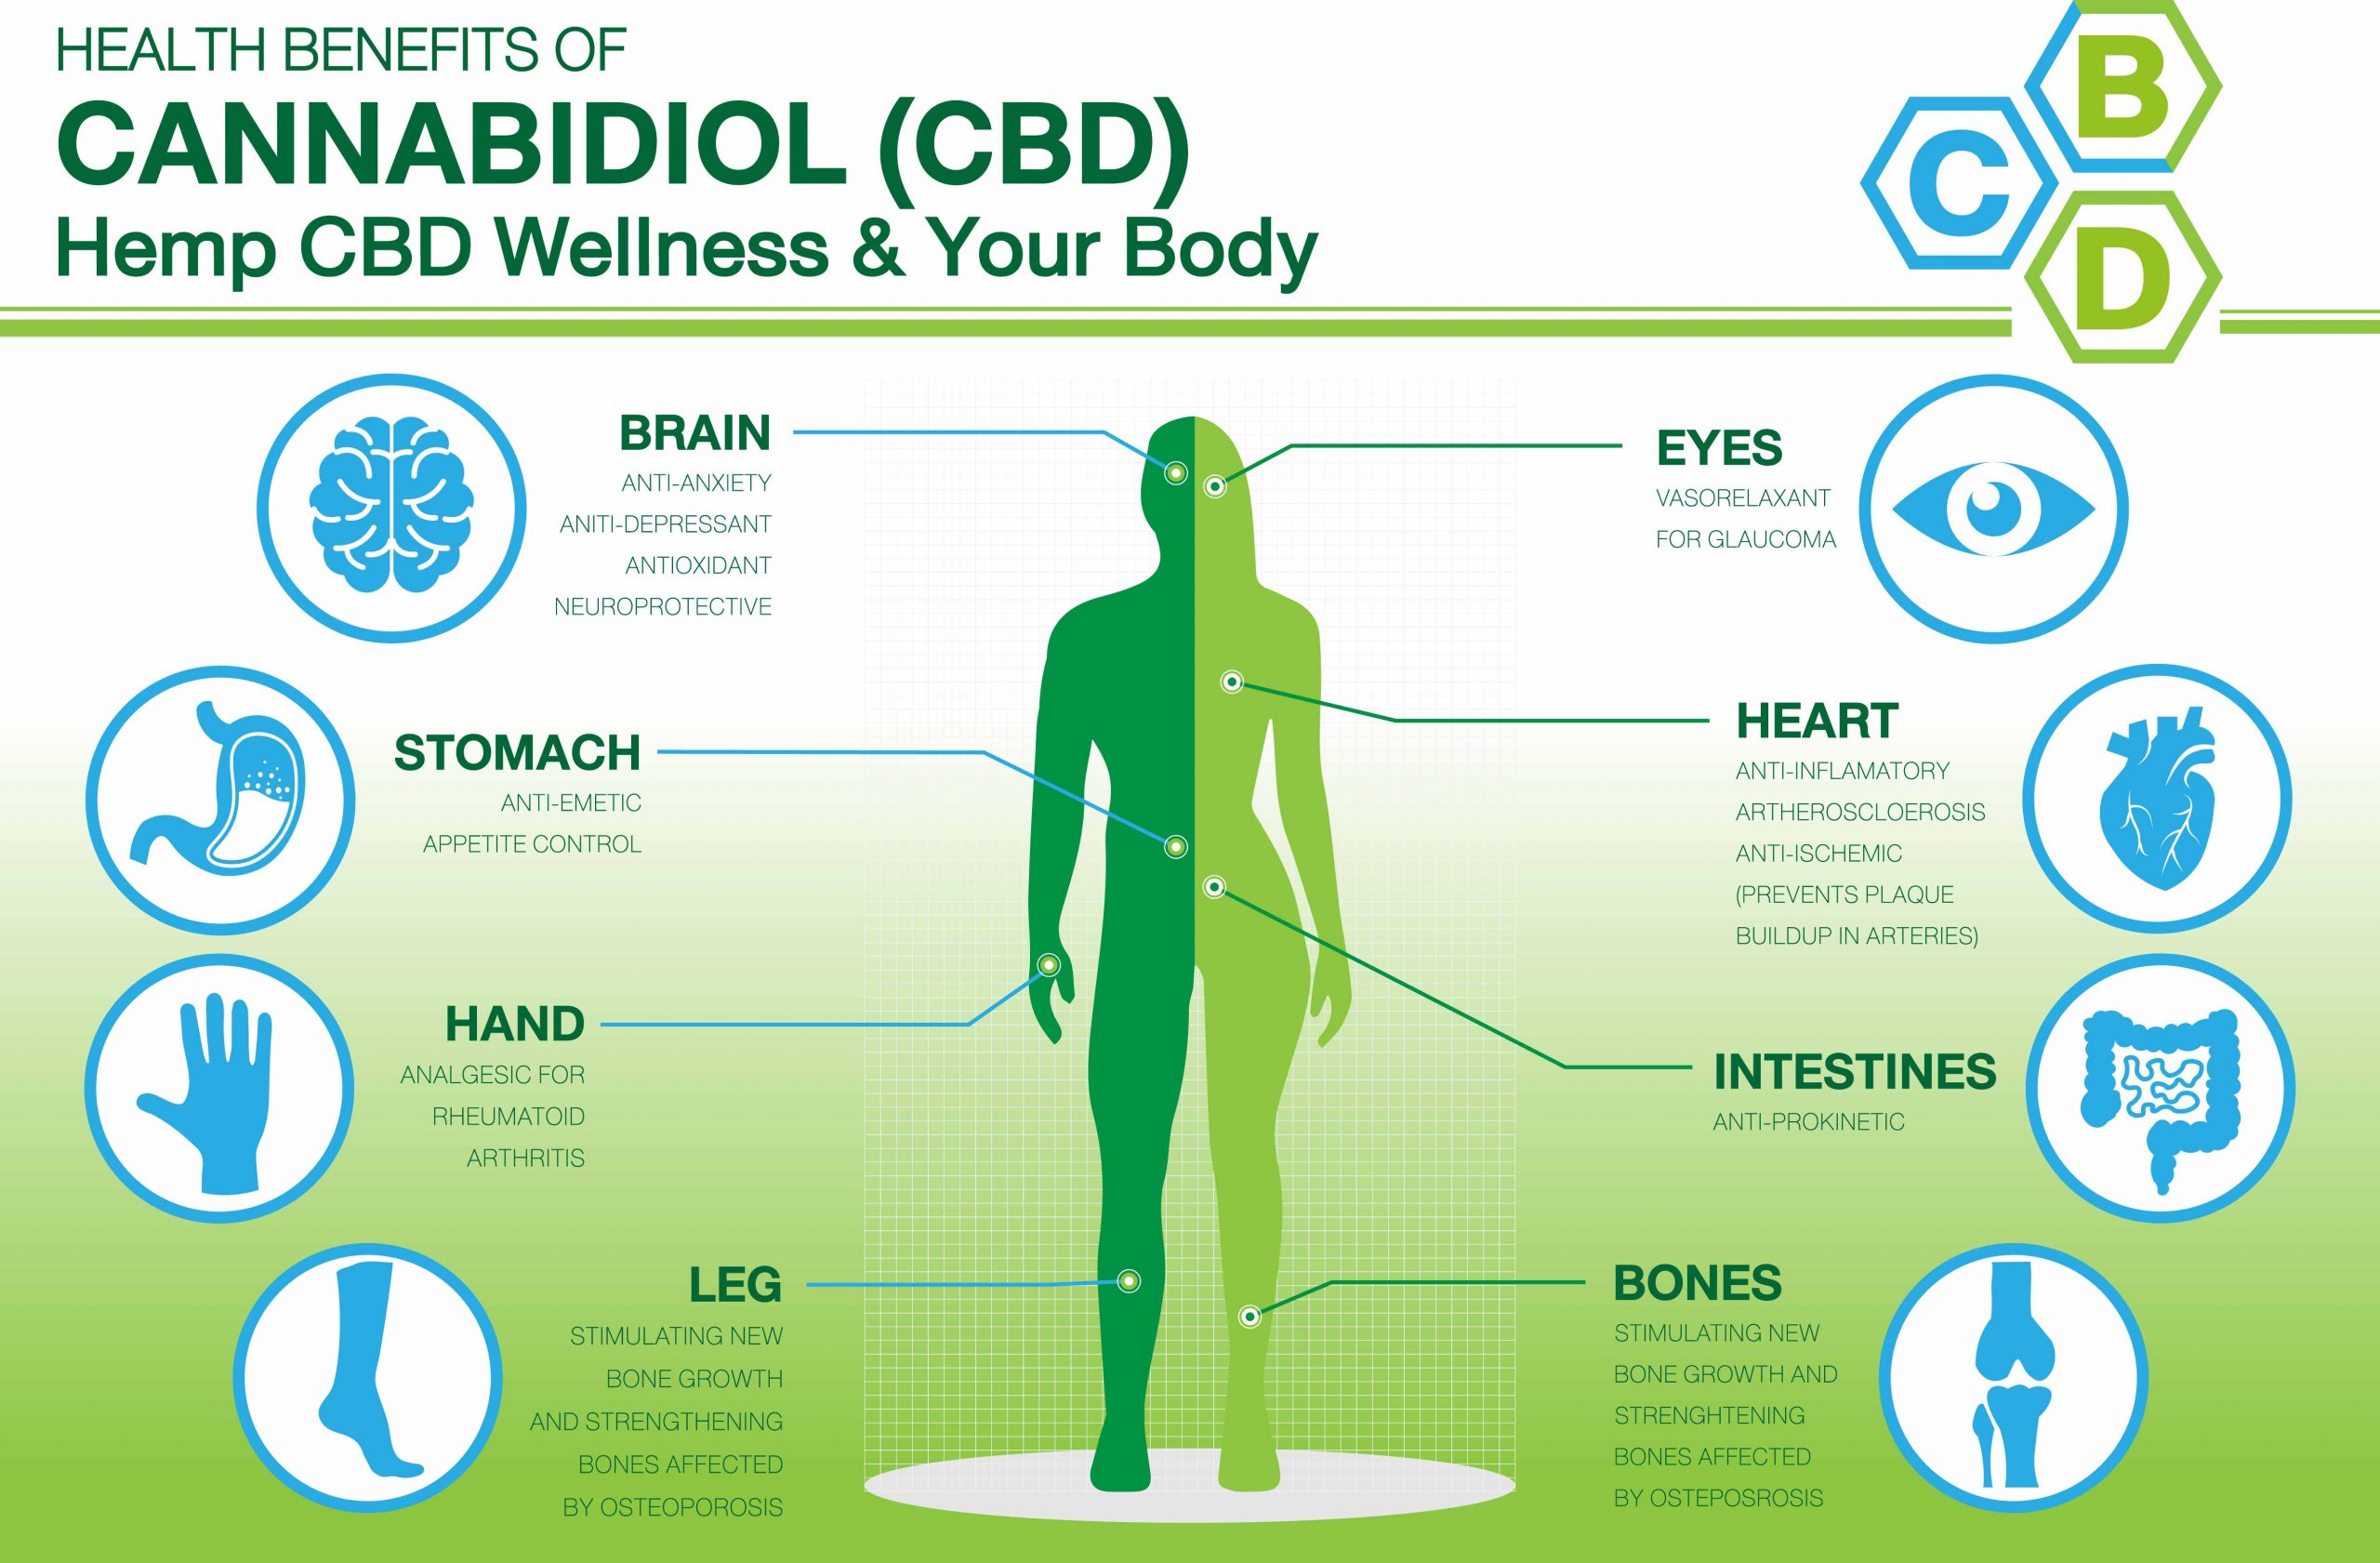 How CBD Effects the body